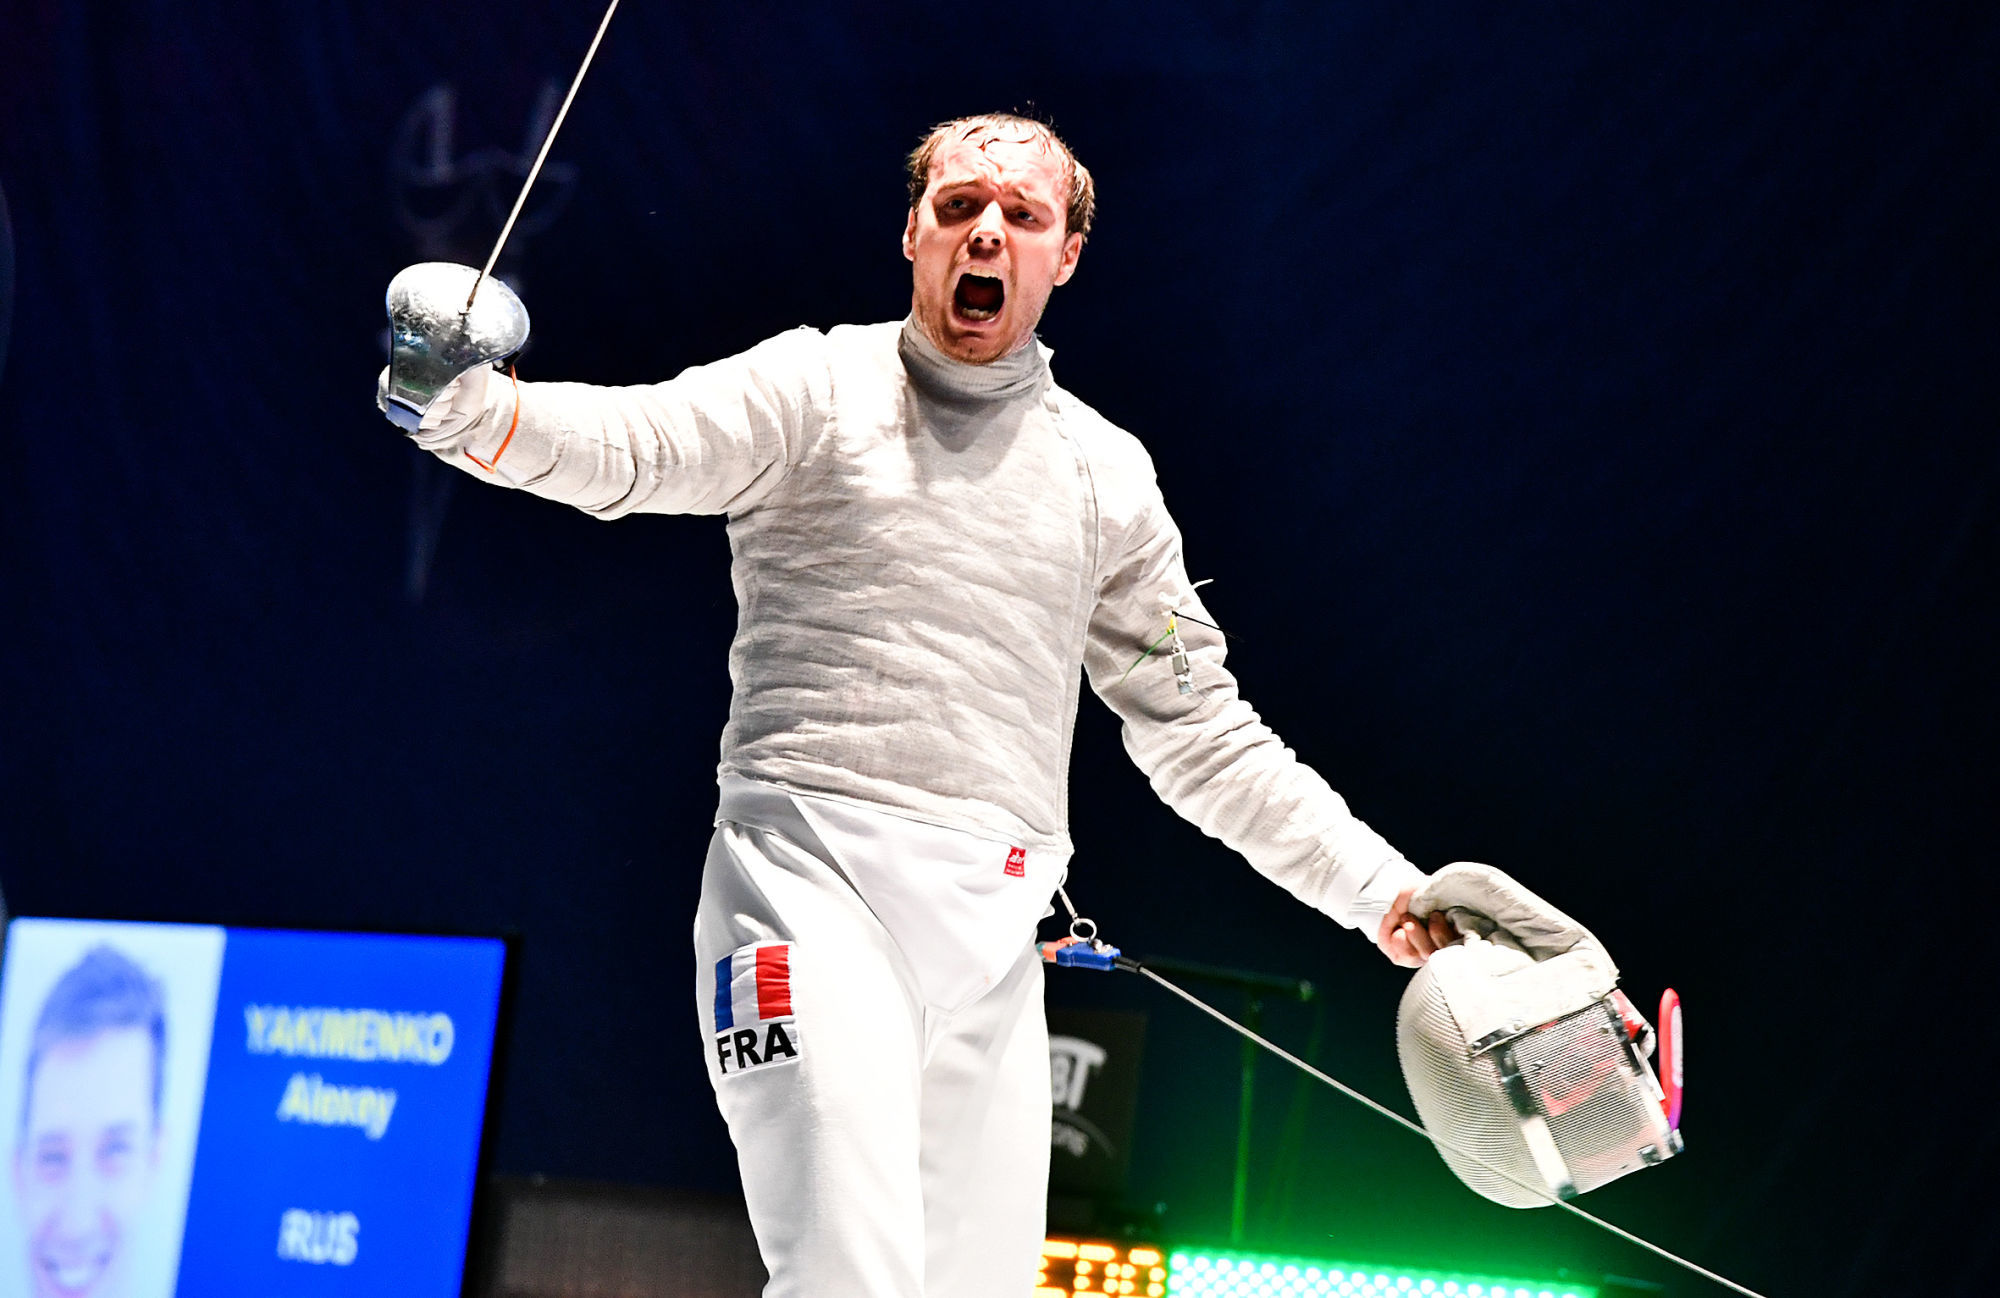 Vincent Anstett during the european Fencing Championship in Torun - Poland on 22th June, 2016